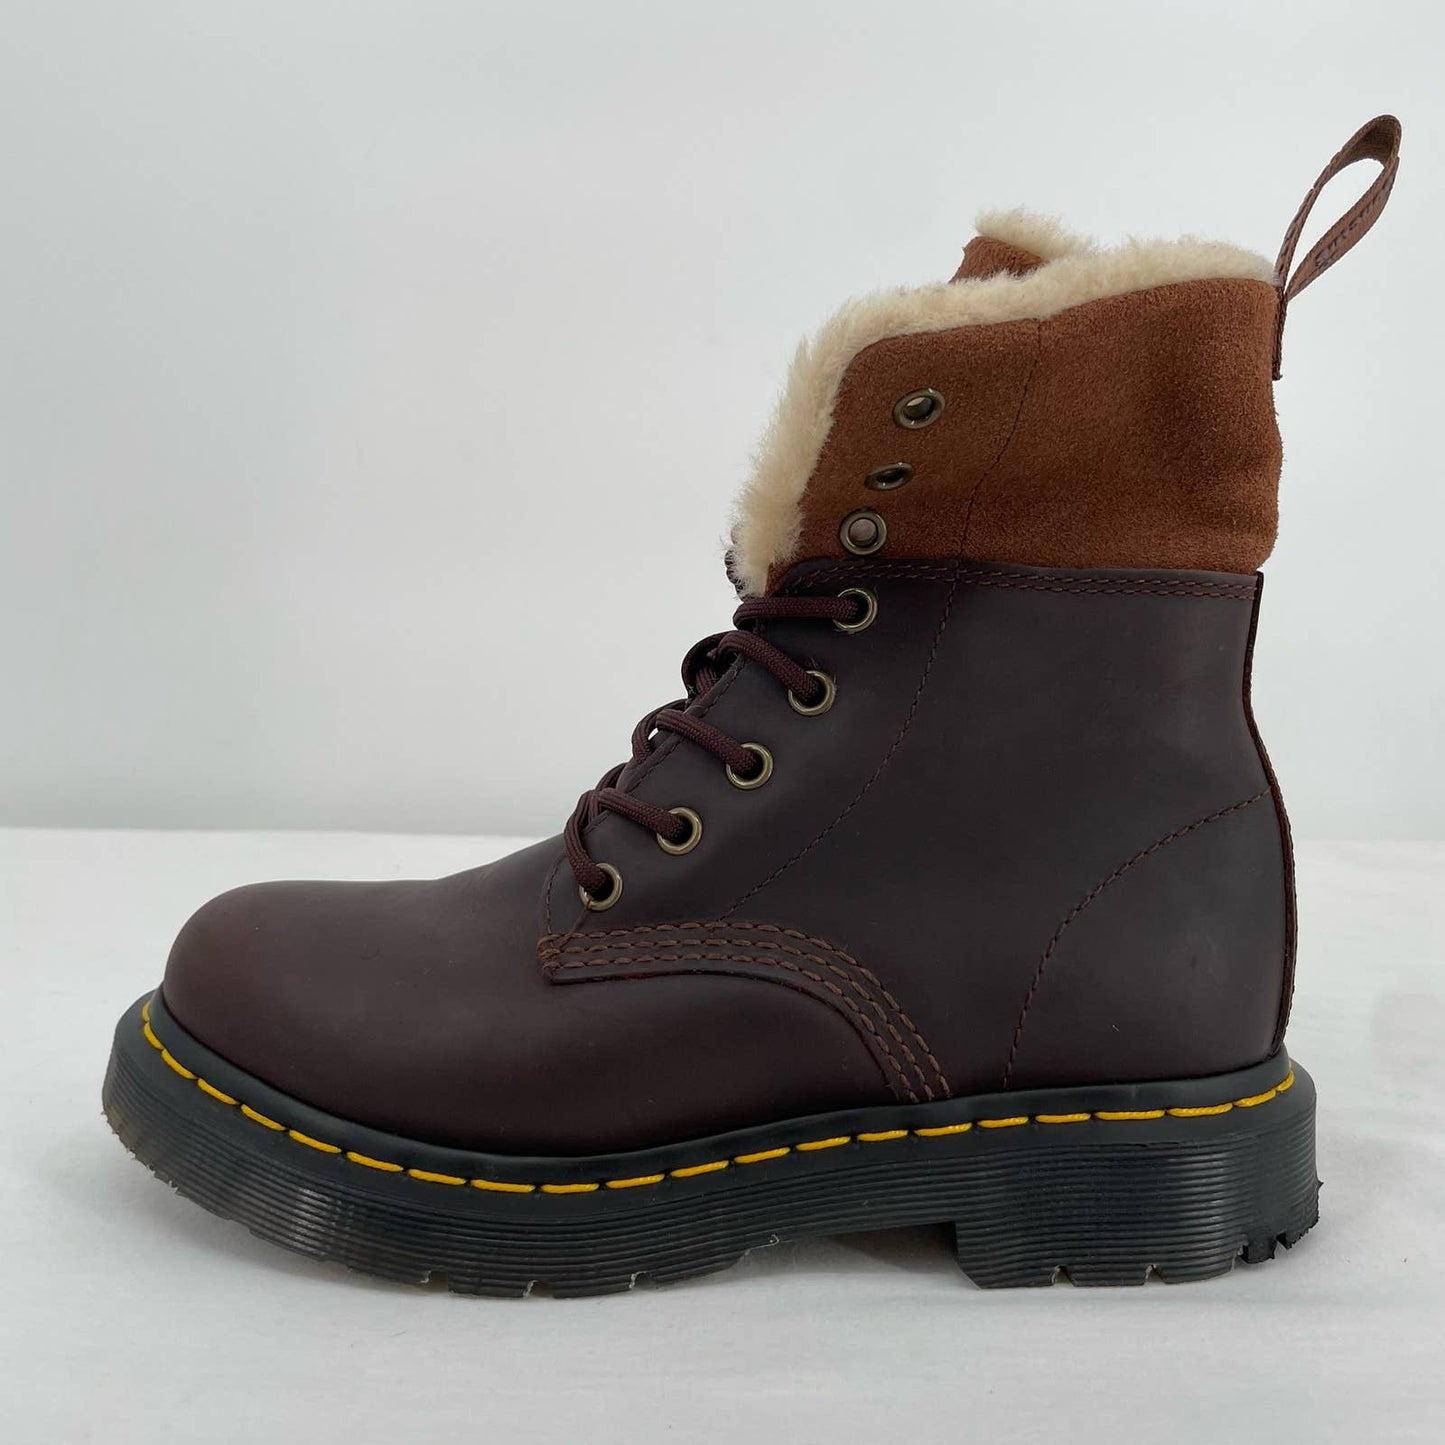 Dr. Marten’s 1460 Kolbert Boots Brown Oiled Leather Faux Fur Lined Winter Style Size 6